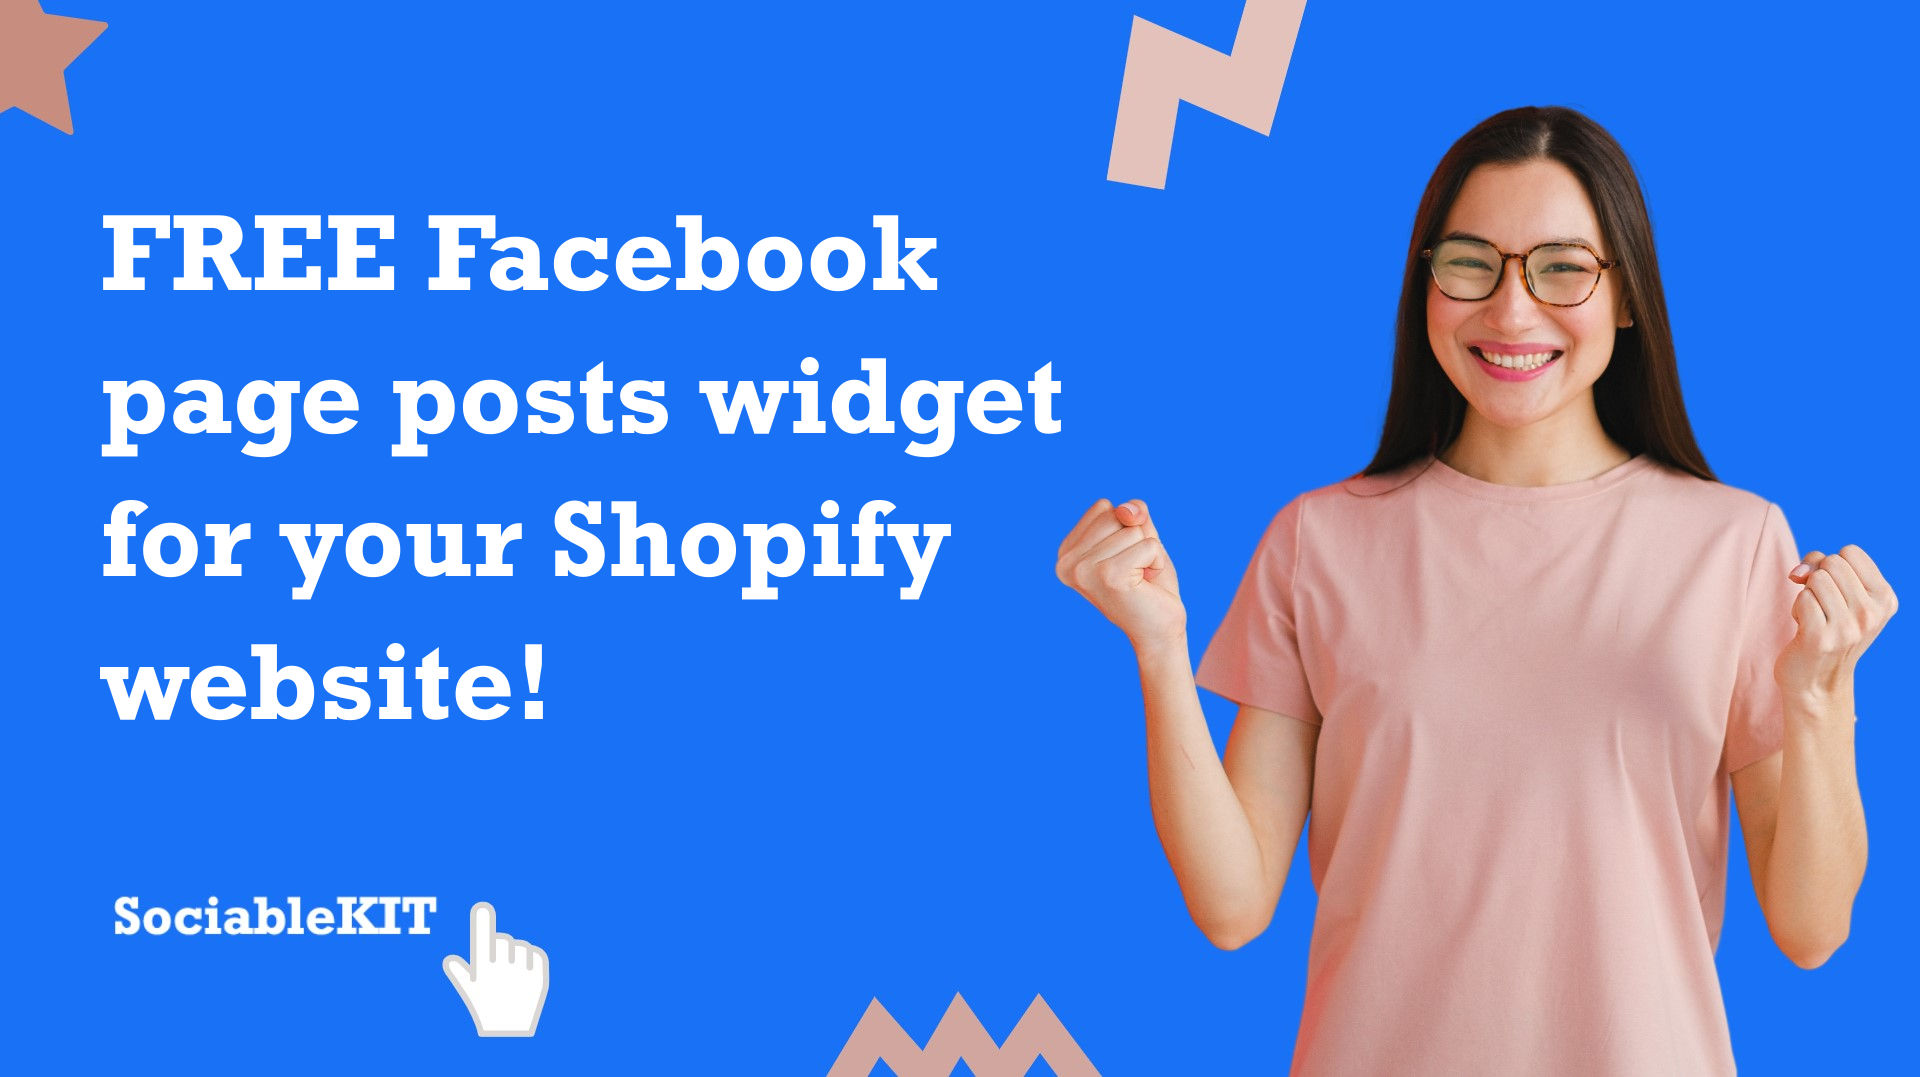 Free Facebook page posts widget for your Shopify website